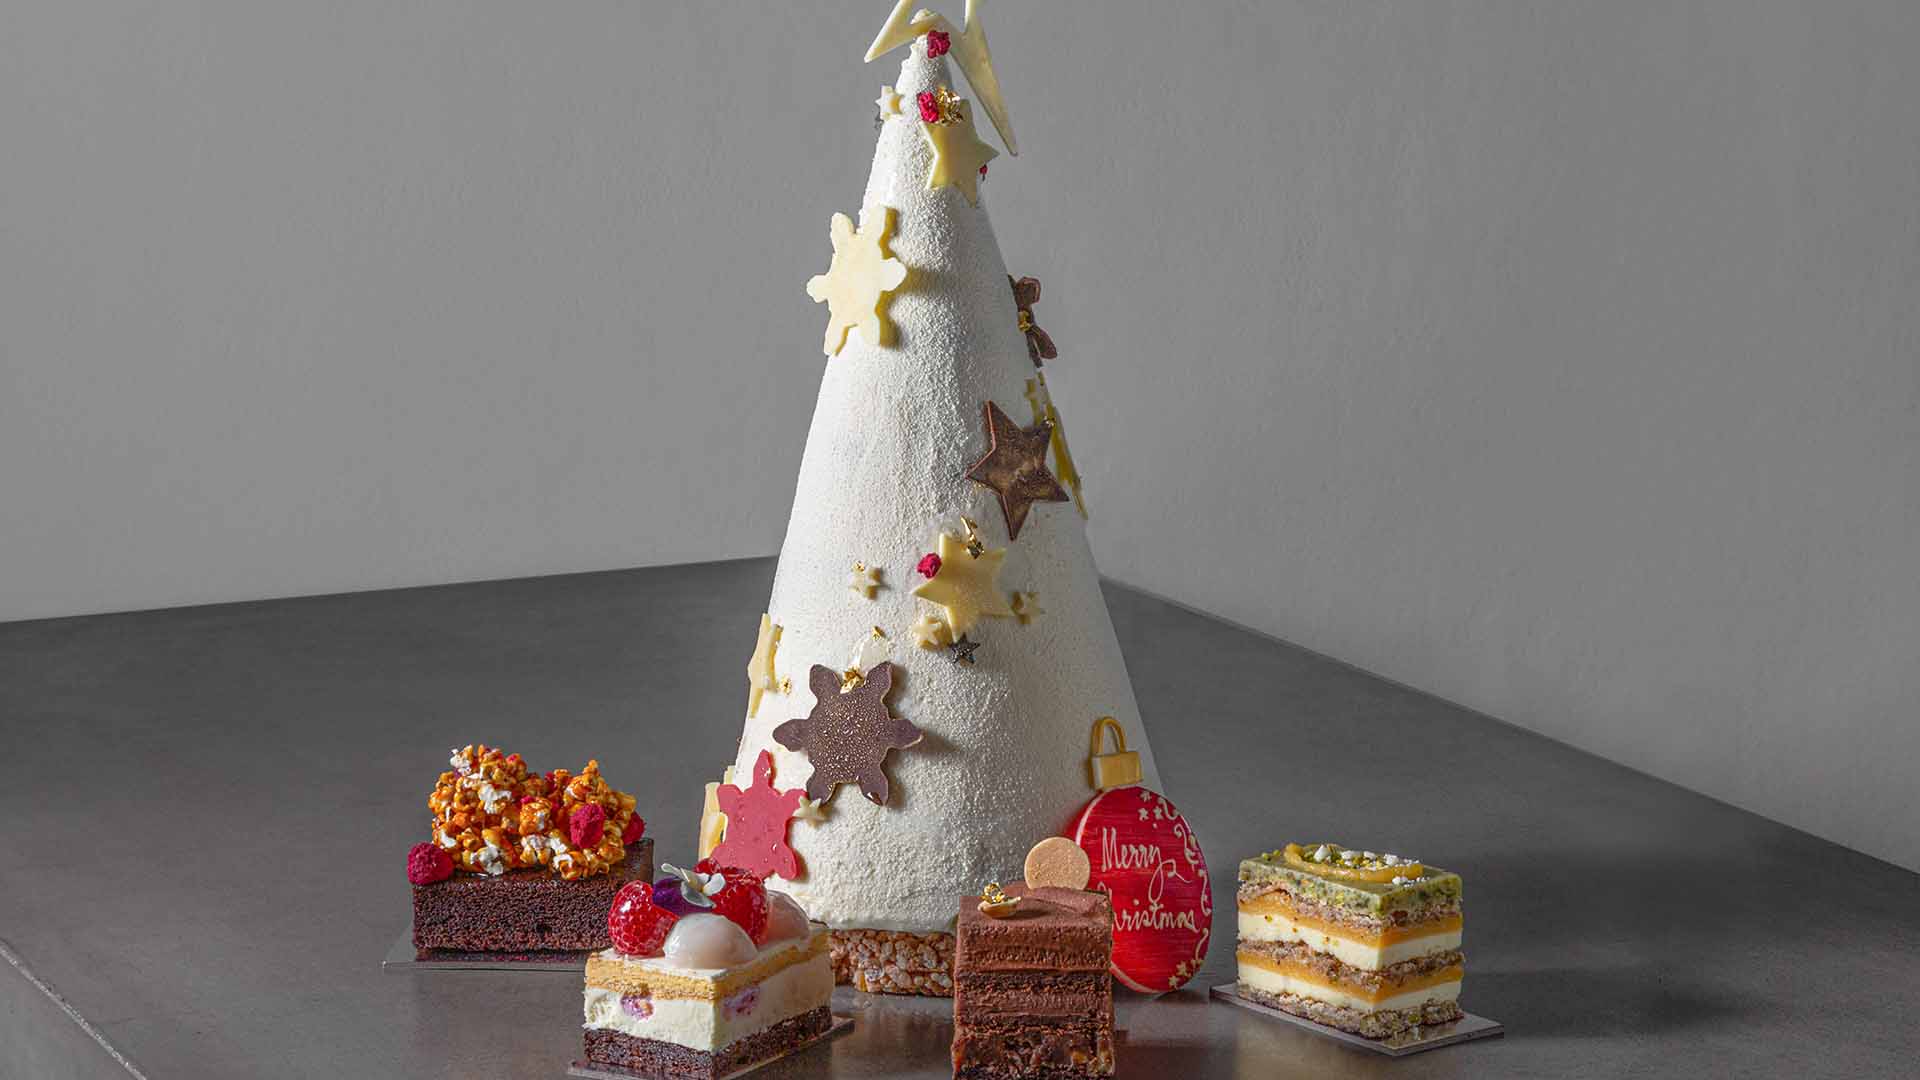 Black Star Pastry's New Cake Lets You Sit an Edible Tree in the Middle of Your Christmas Spread